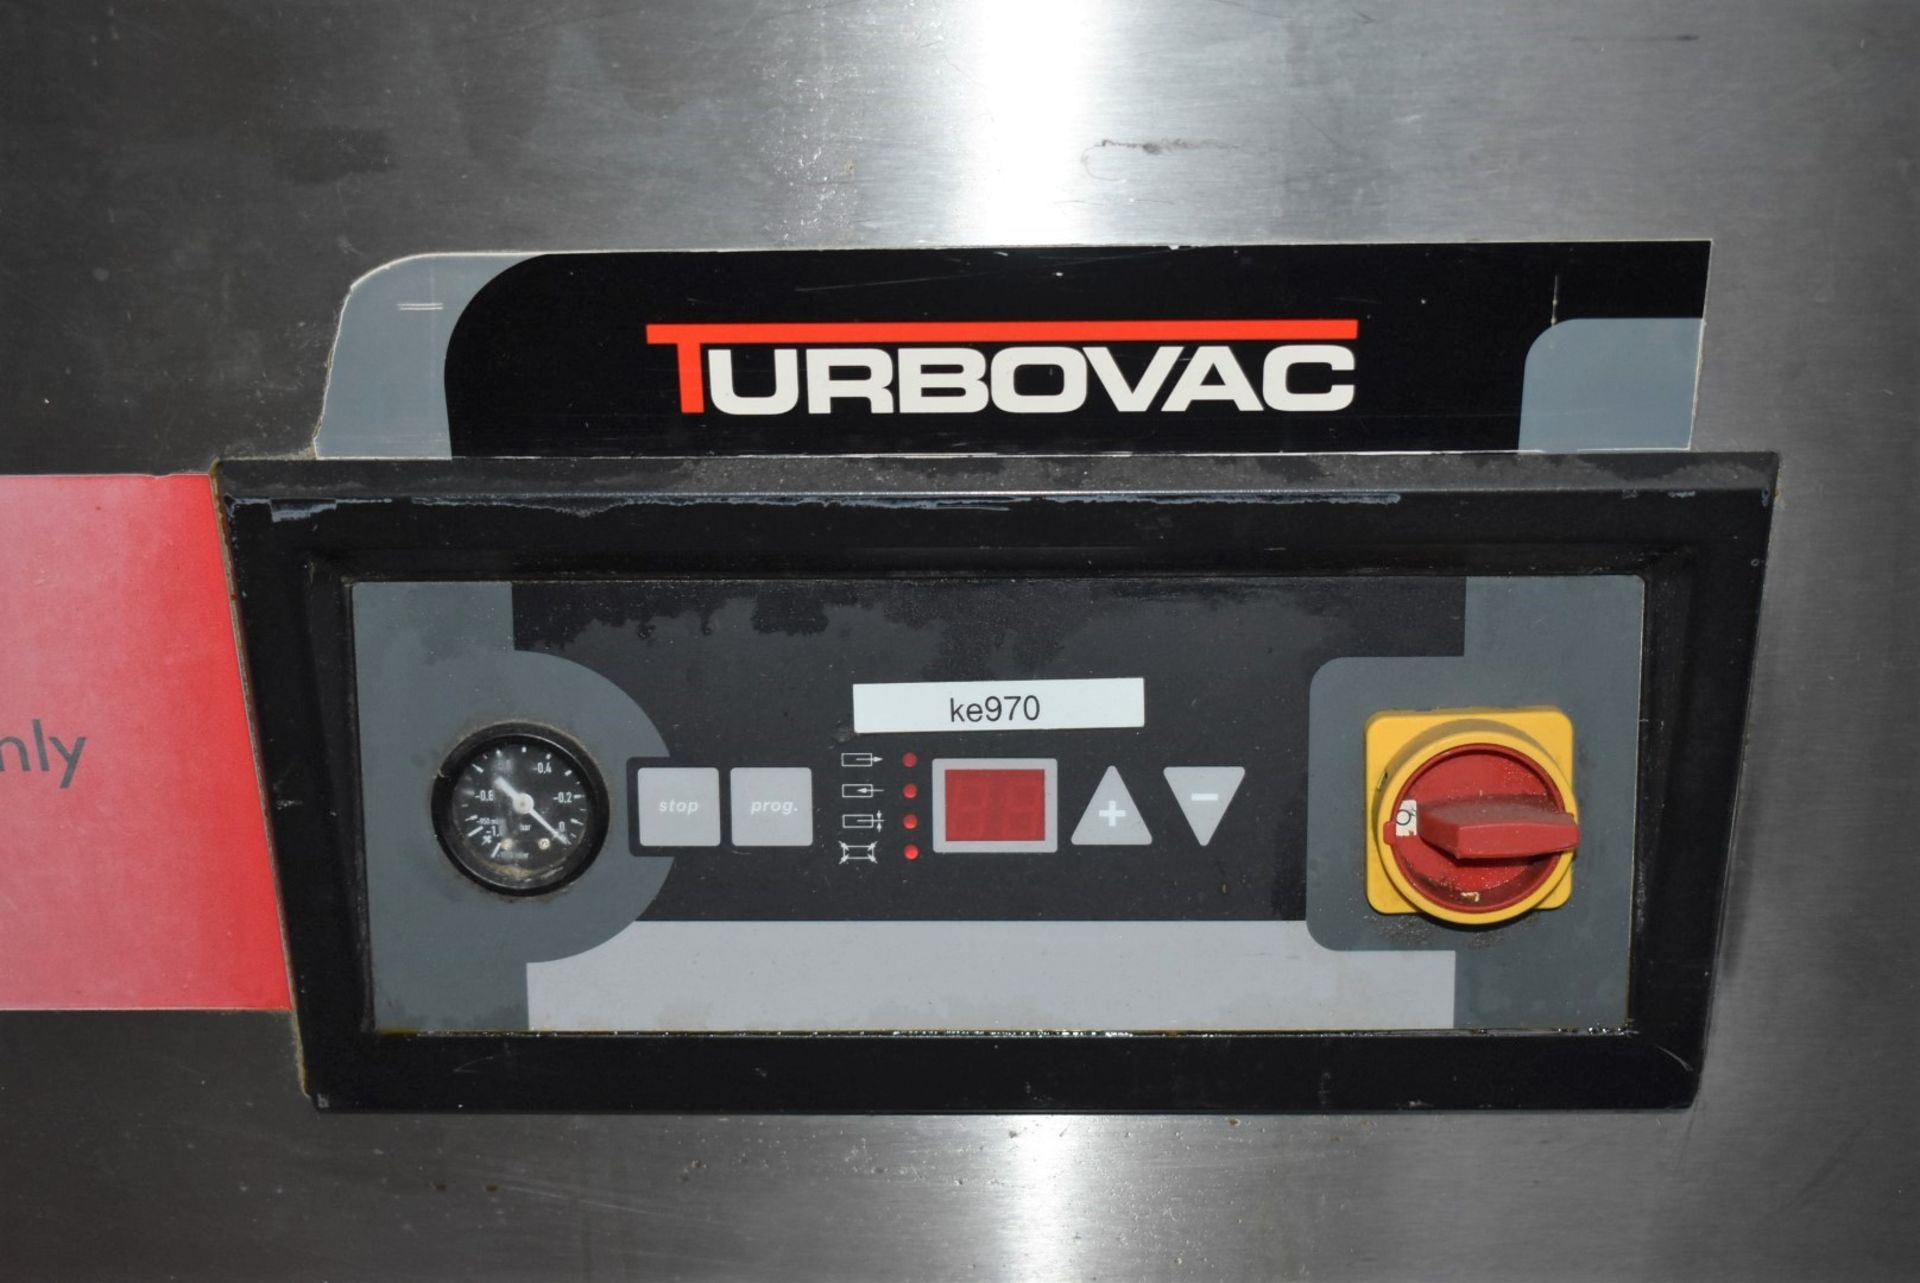 1 x Turbovac Vacuum Packer - Model SB520 - 3 Phase - Recently Removed From a Restaurant - Image 4 of 4